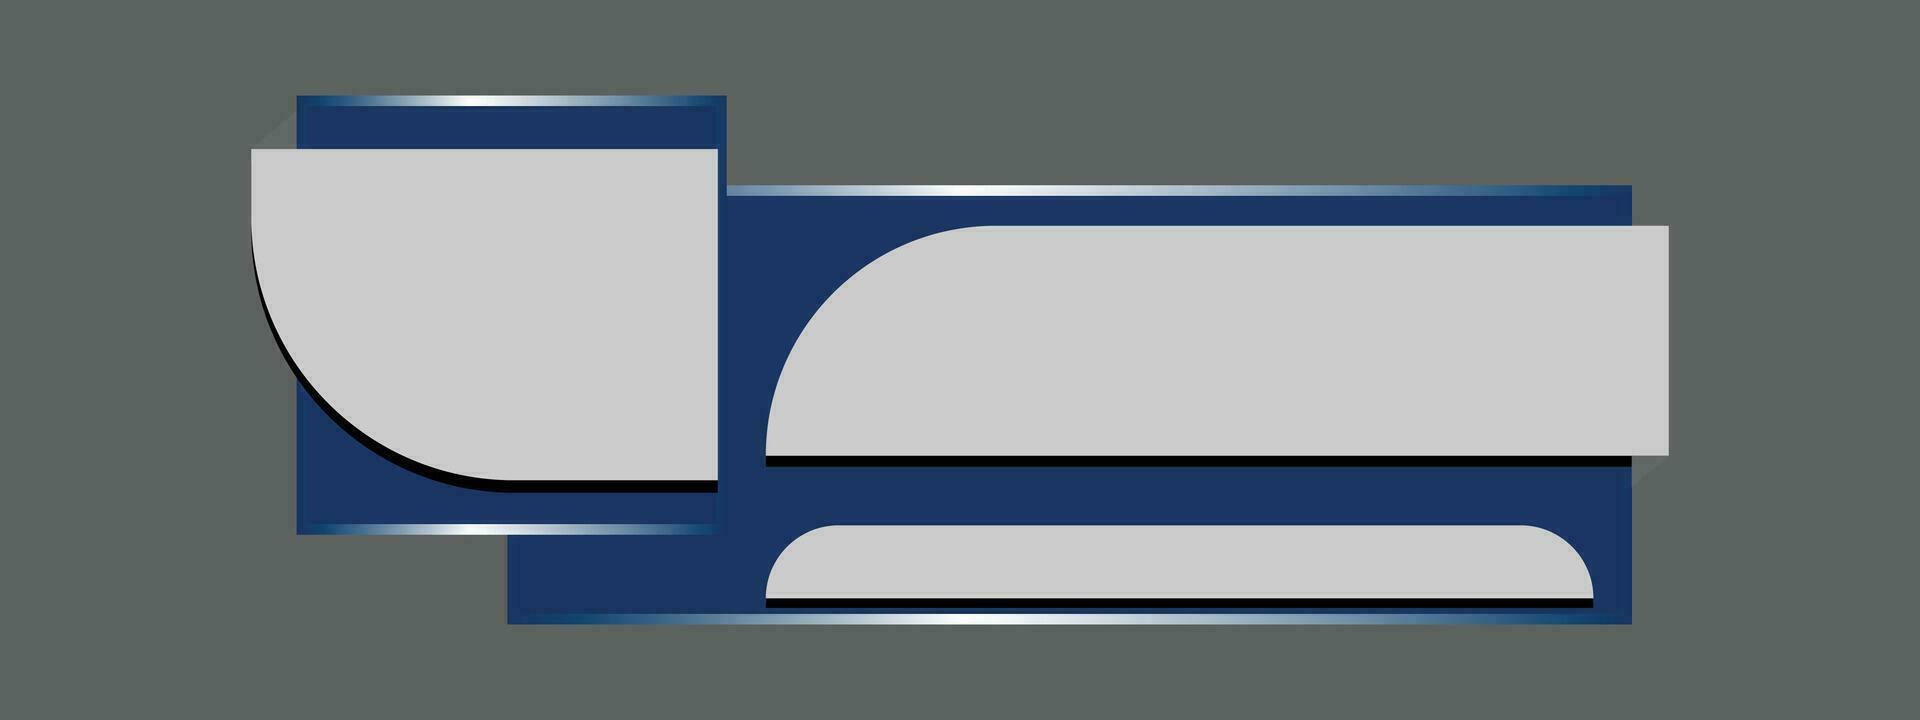 Simple Modern Lower Third In Blue For TV Shows, Streaming And Perfect For News vector